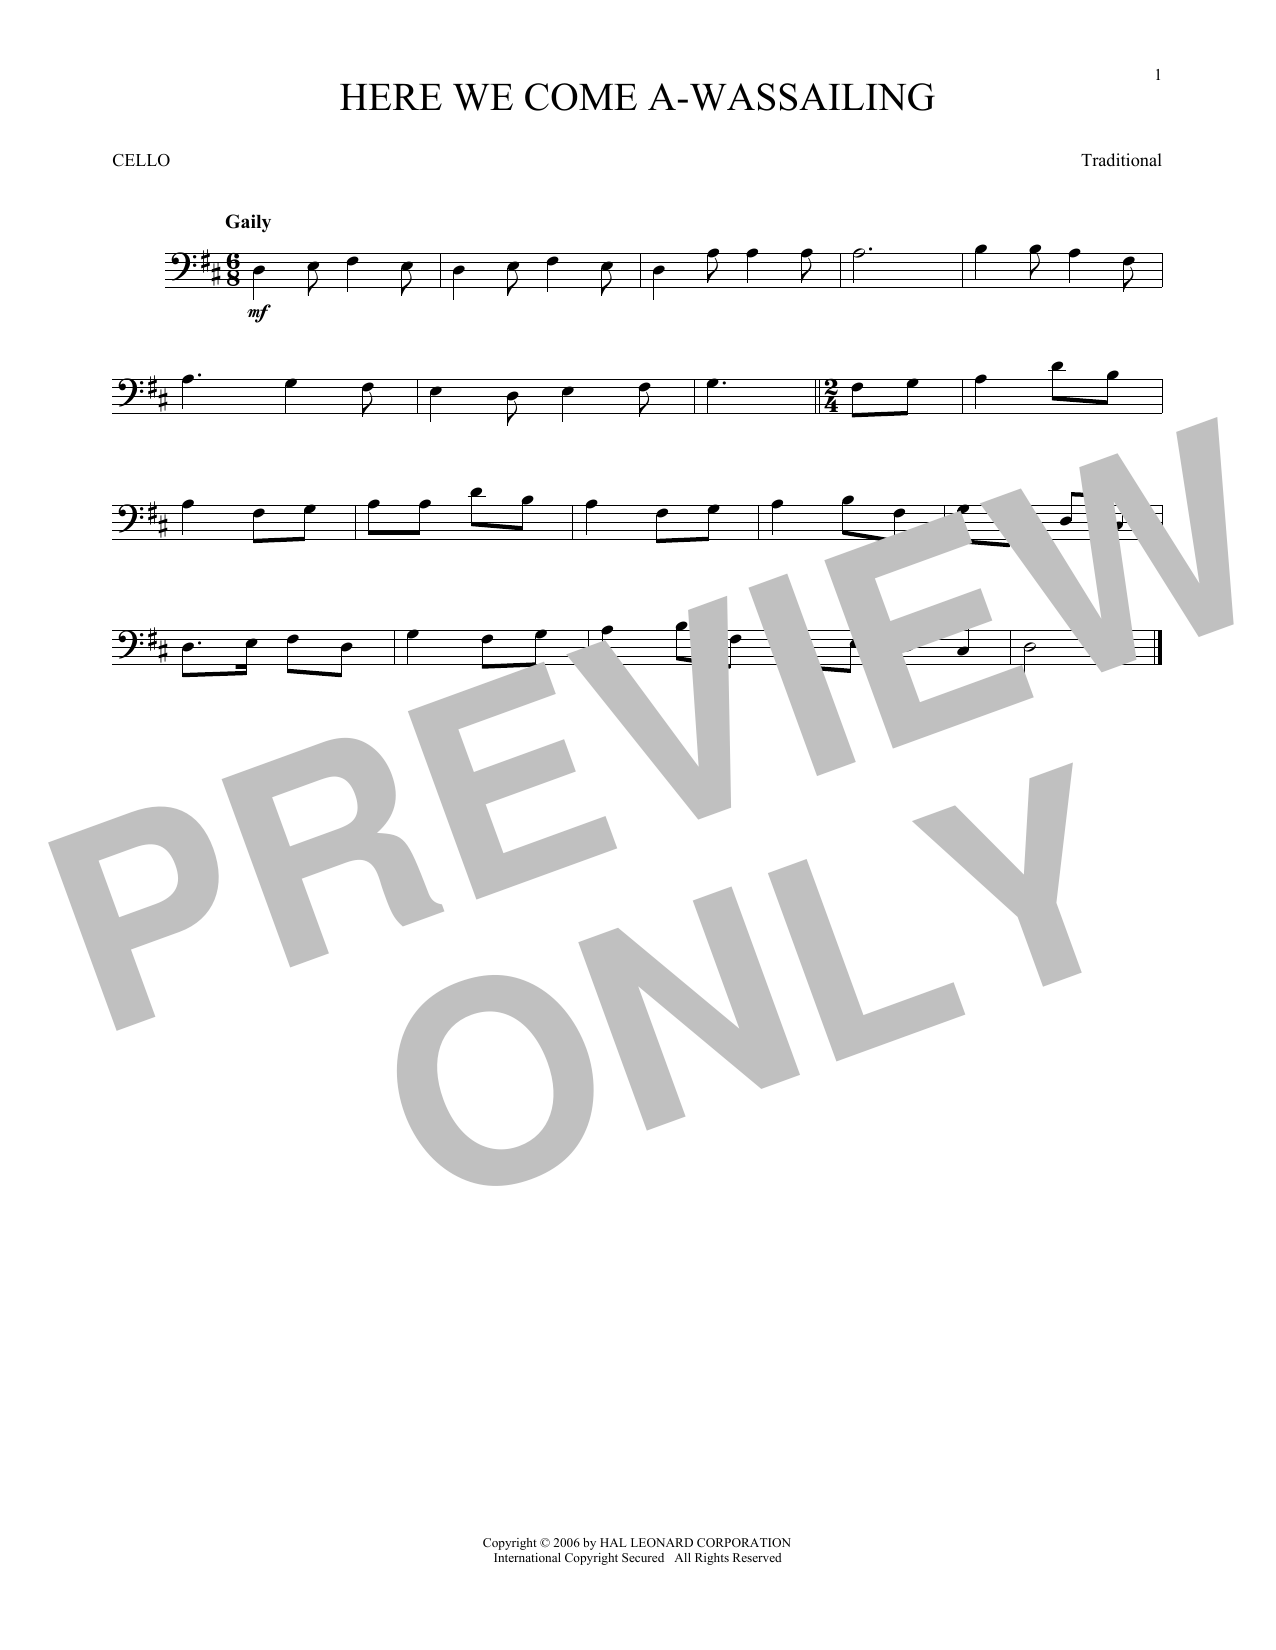 Download Traditional Here We Come A-Wassailing Sheet Music